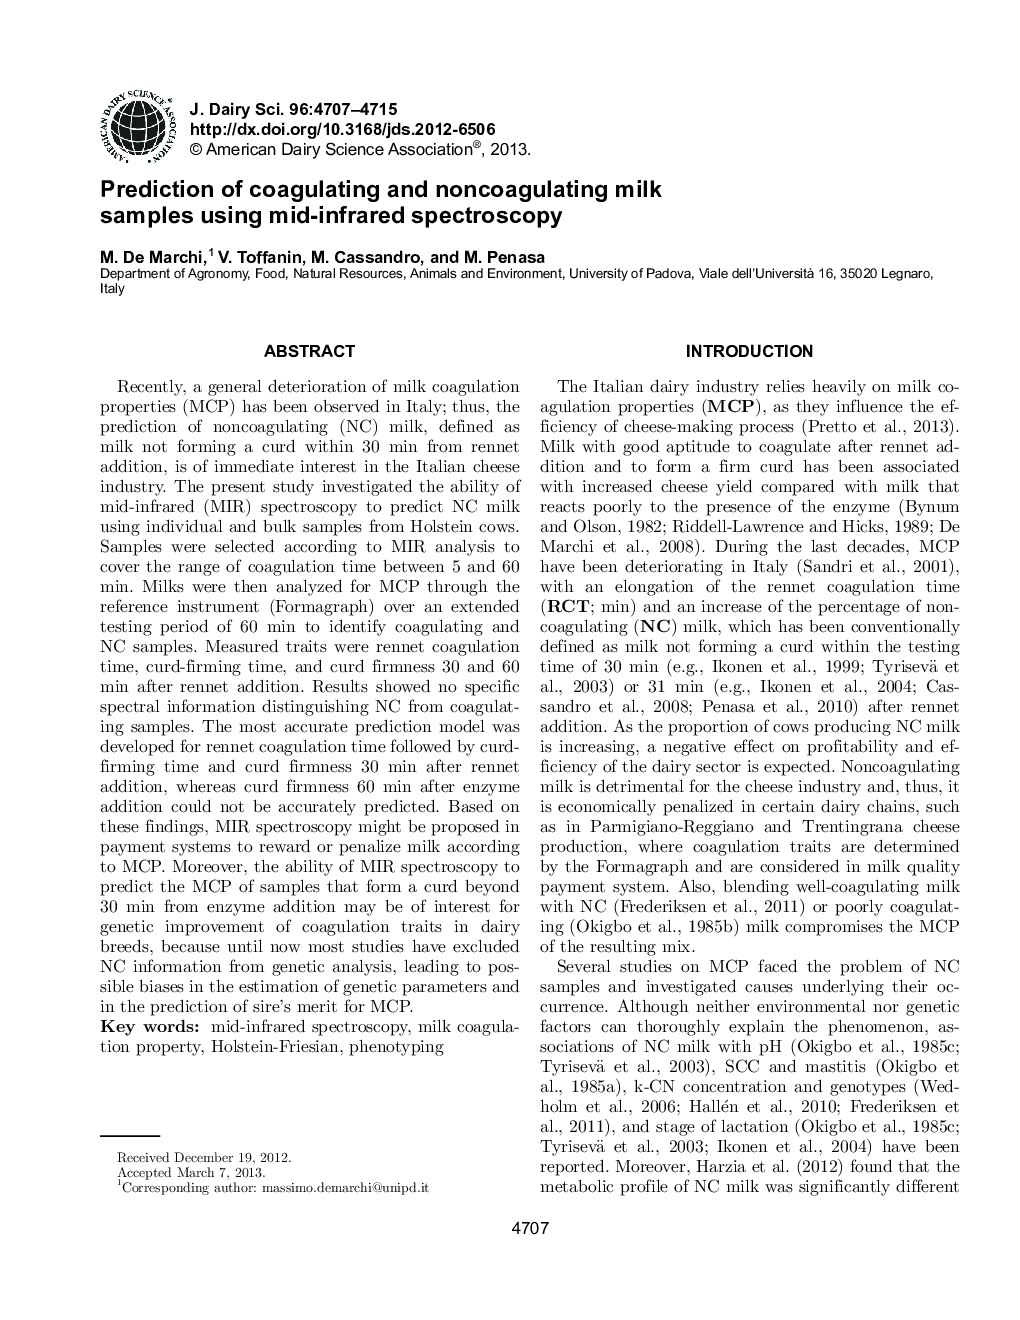 Prediction of coagulating and noncoagulating milk samples using mid-infrared spectroscopy